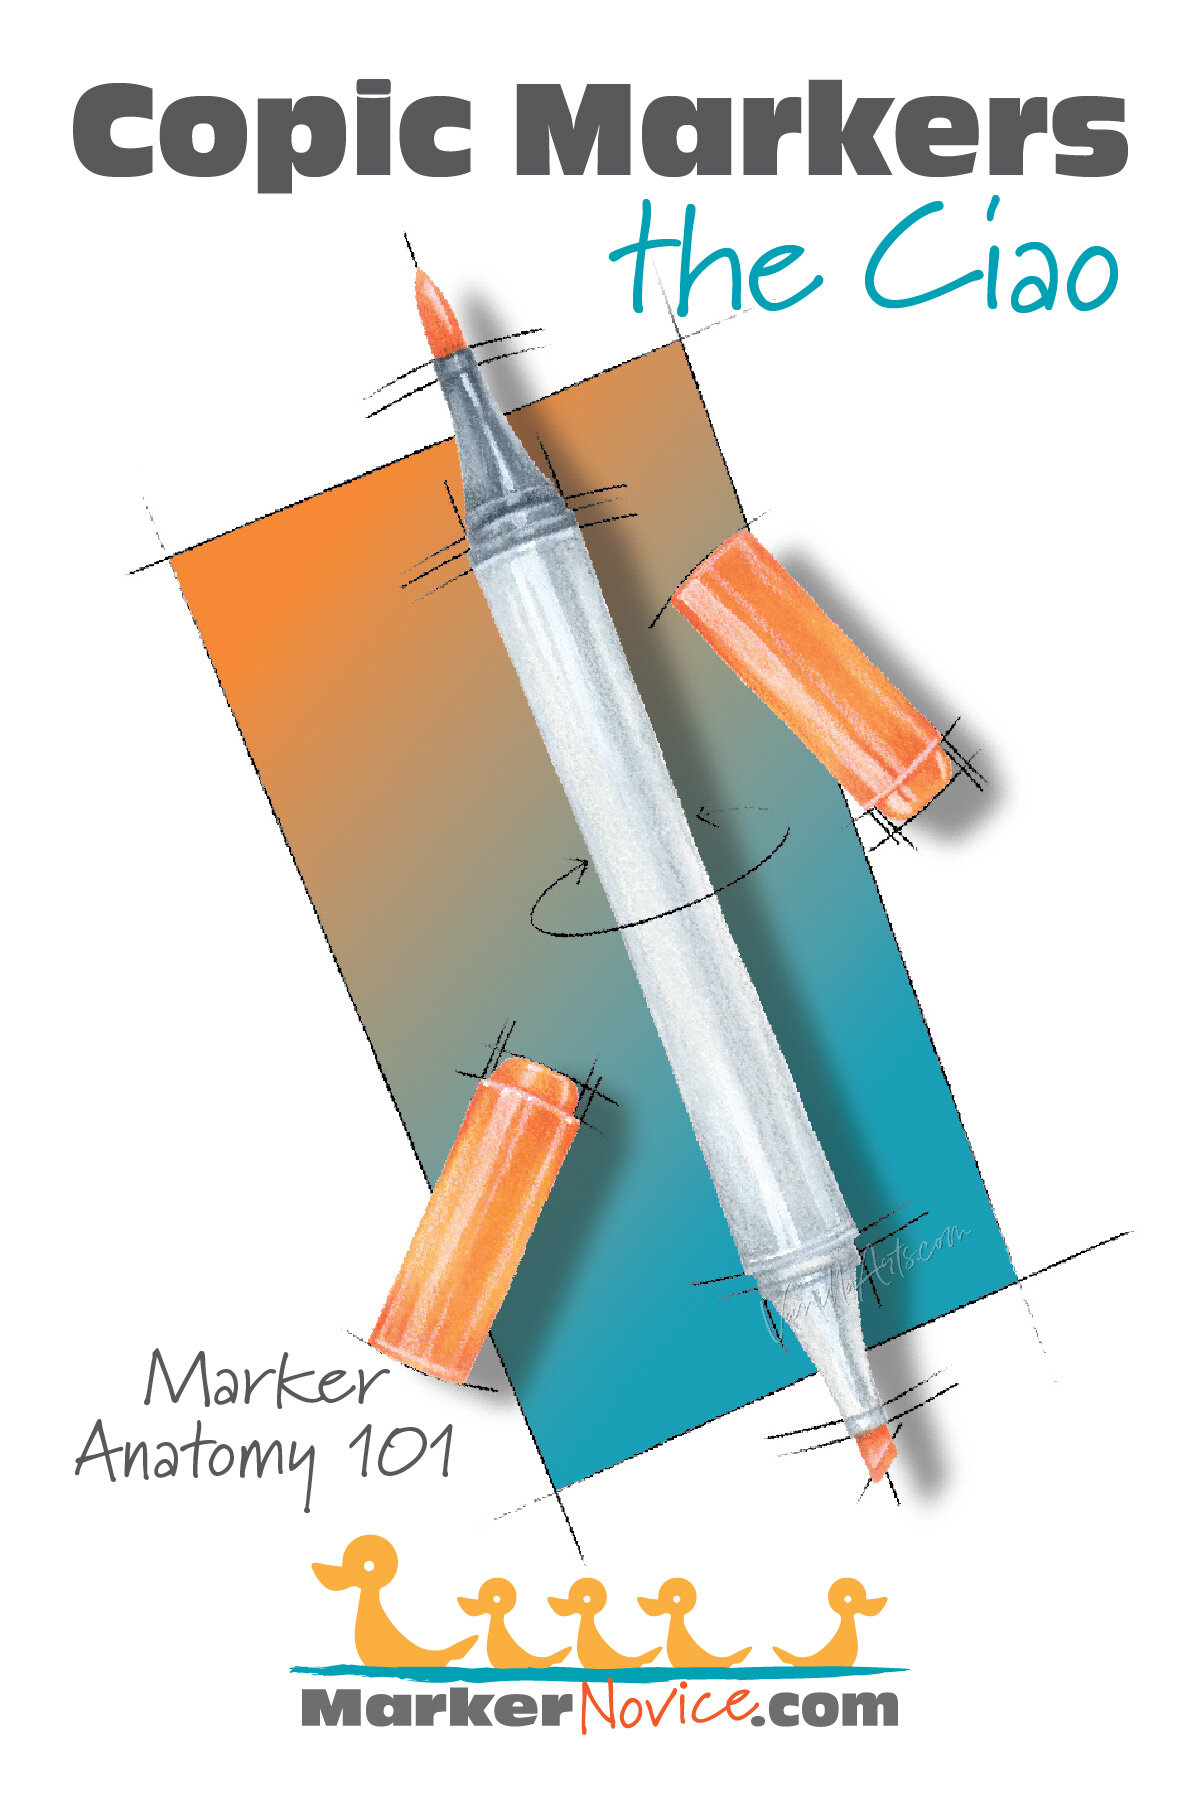 Copic Ciao Marker: All About the Ciao + Is This the Best Marker for You? —  Marker Novice